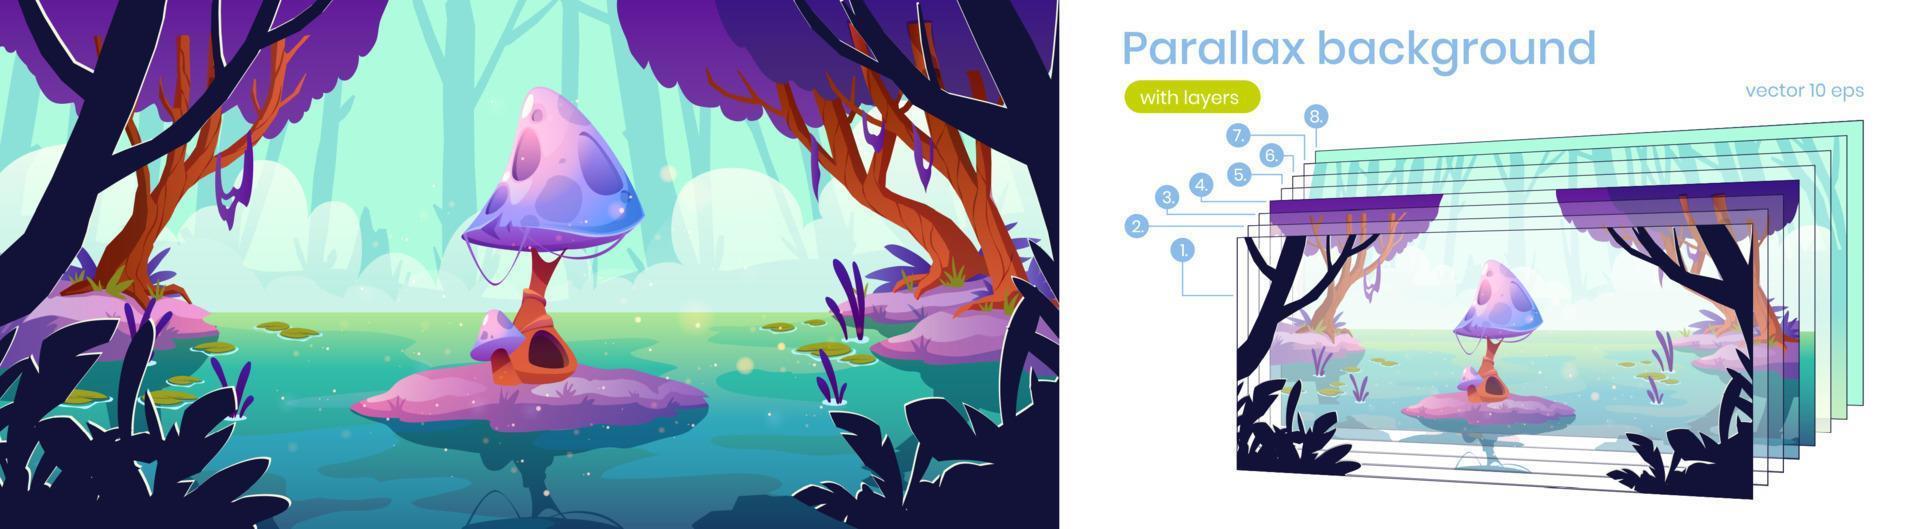 Parallax background for fantasy game with mushroom vector